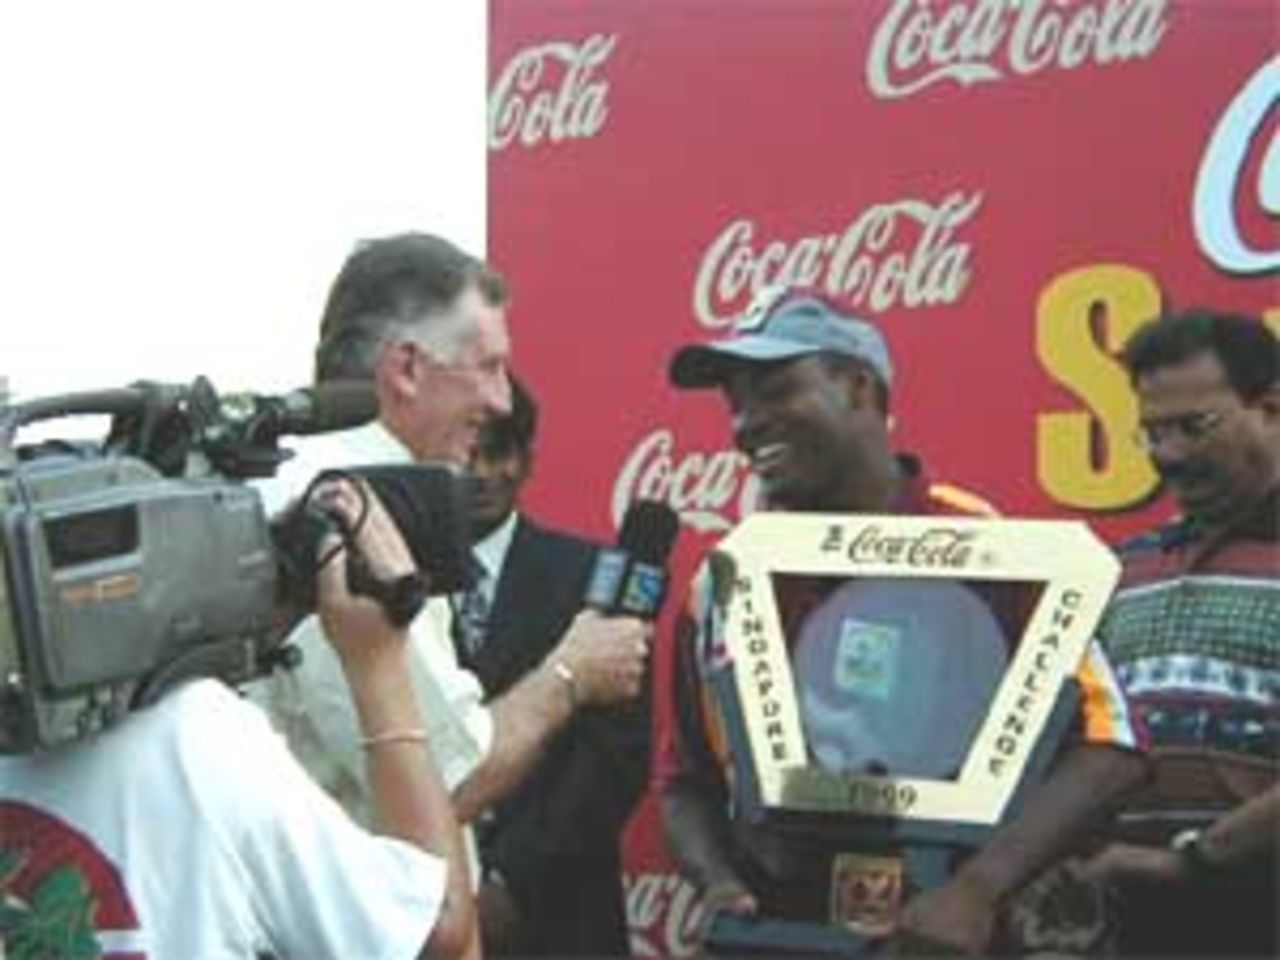 Victorious Brian Lara speaks to Ian Chappell, India v West Indies (Final), Coca-Cola Singapore Challenge, 1999-2000, Kallang Ground, Singapore, 8 Sep 1999